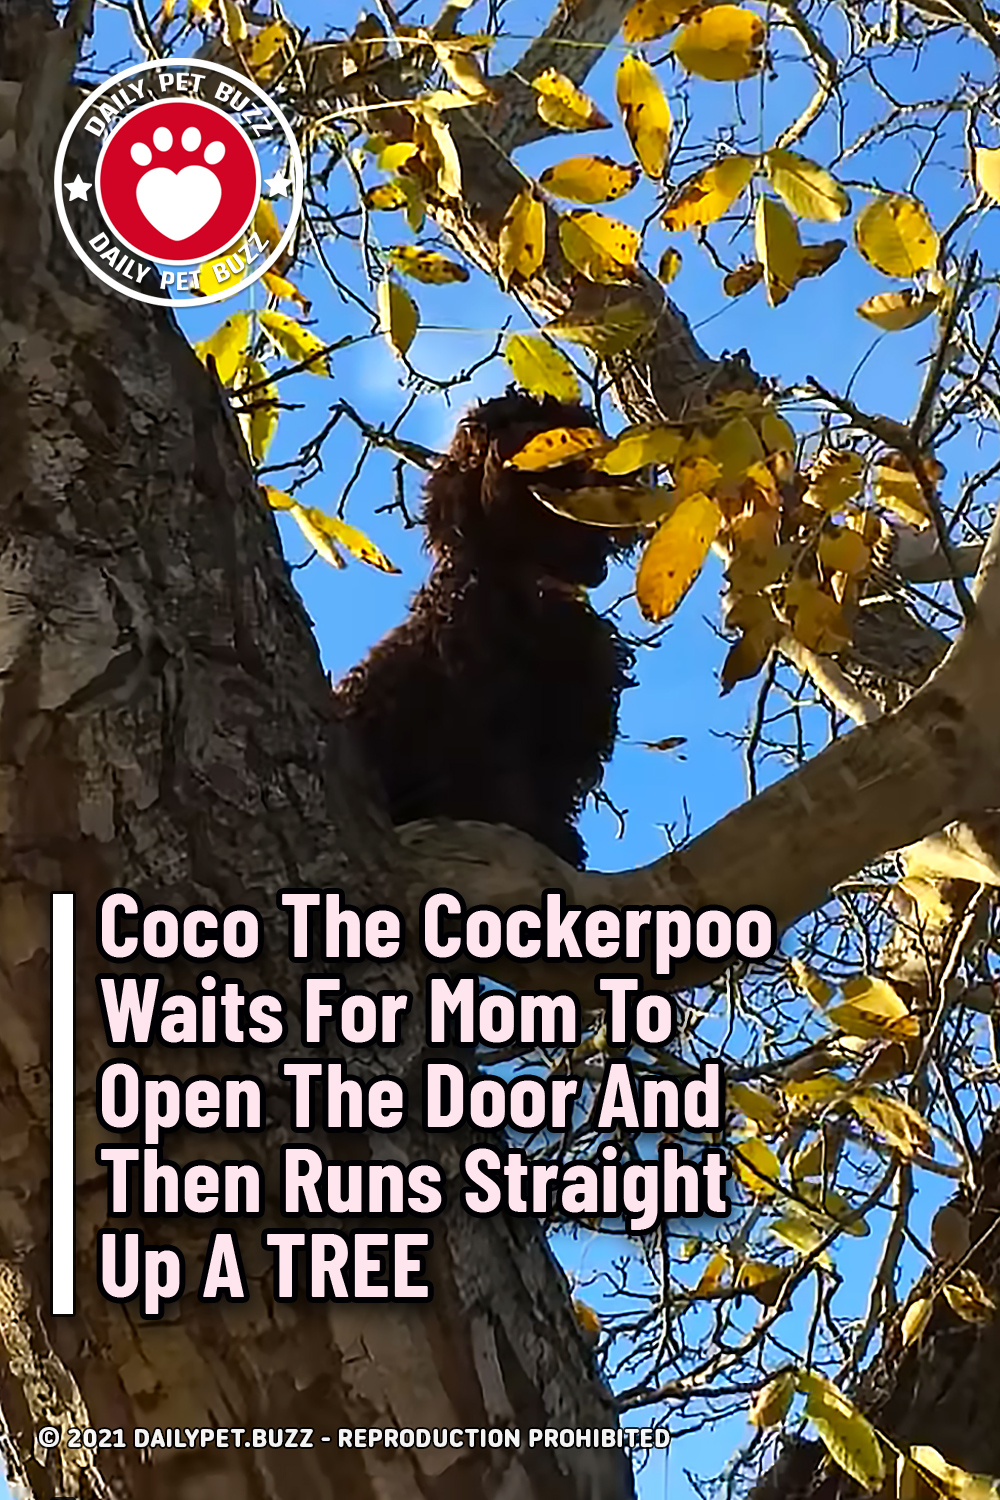 Coco The Cockerpoo Waits For Mom To Open The Door And Then Runs Straight Up A TREE